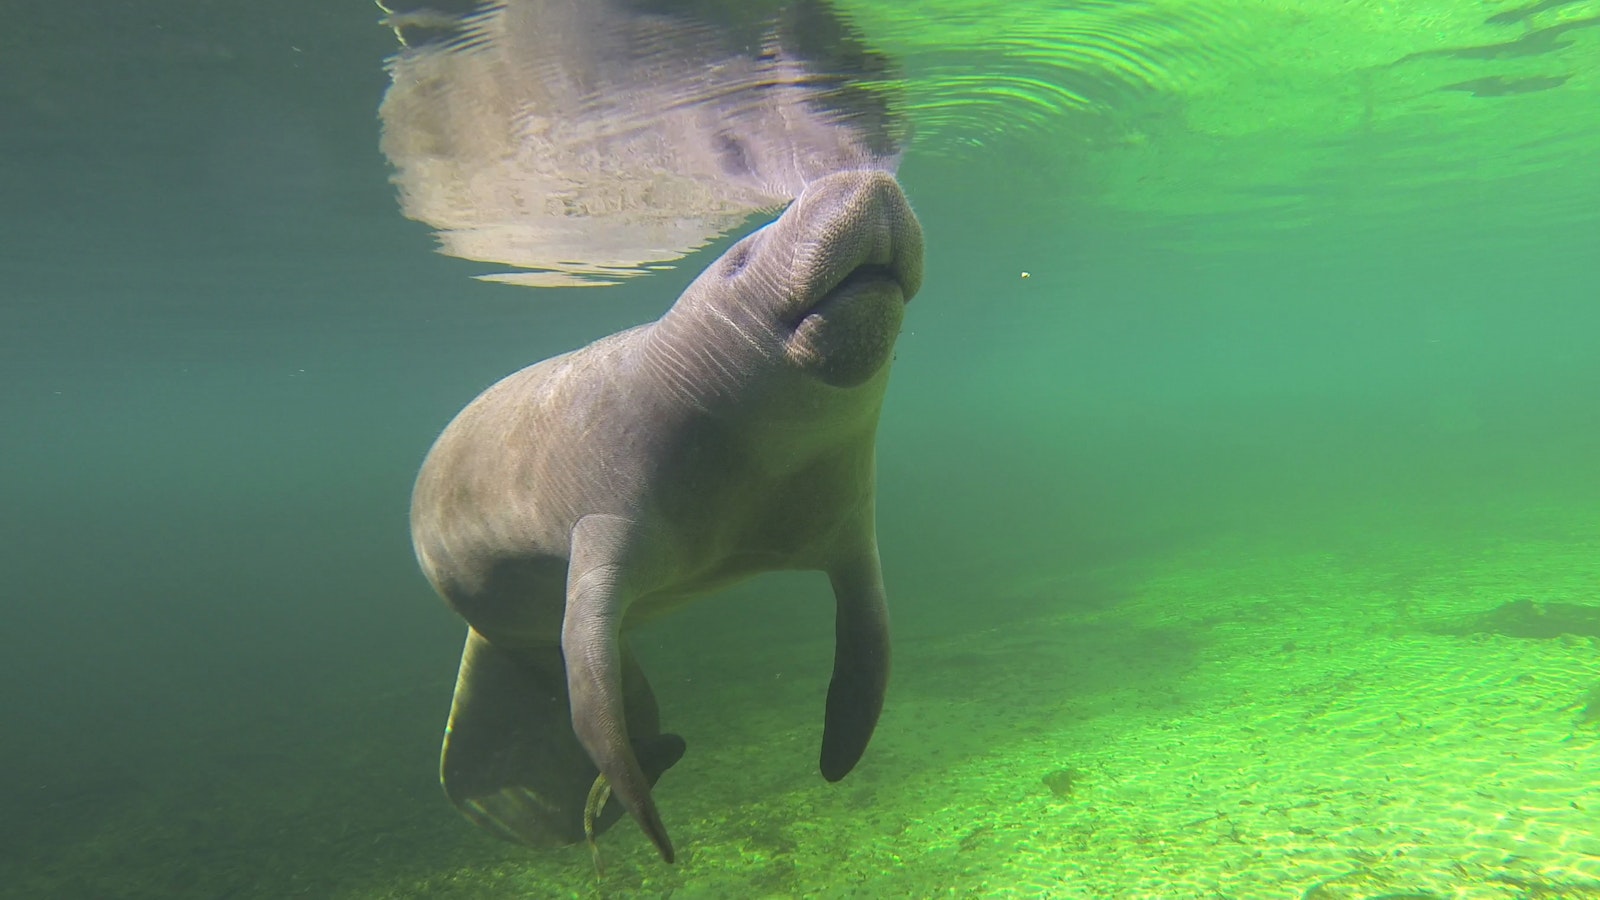 Underwater image of a manatee floating close to the surface of water